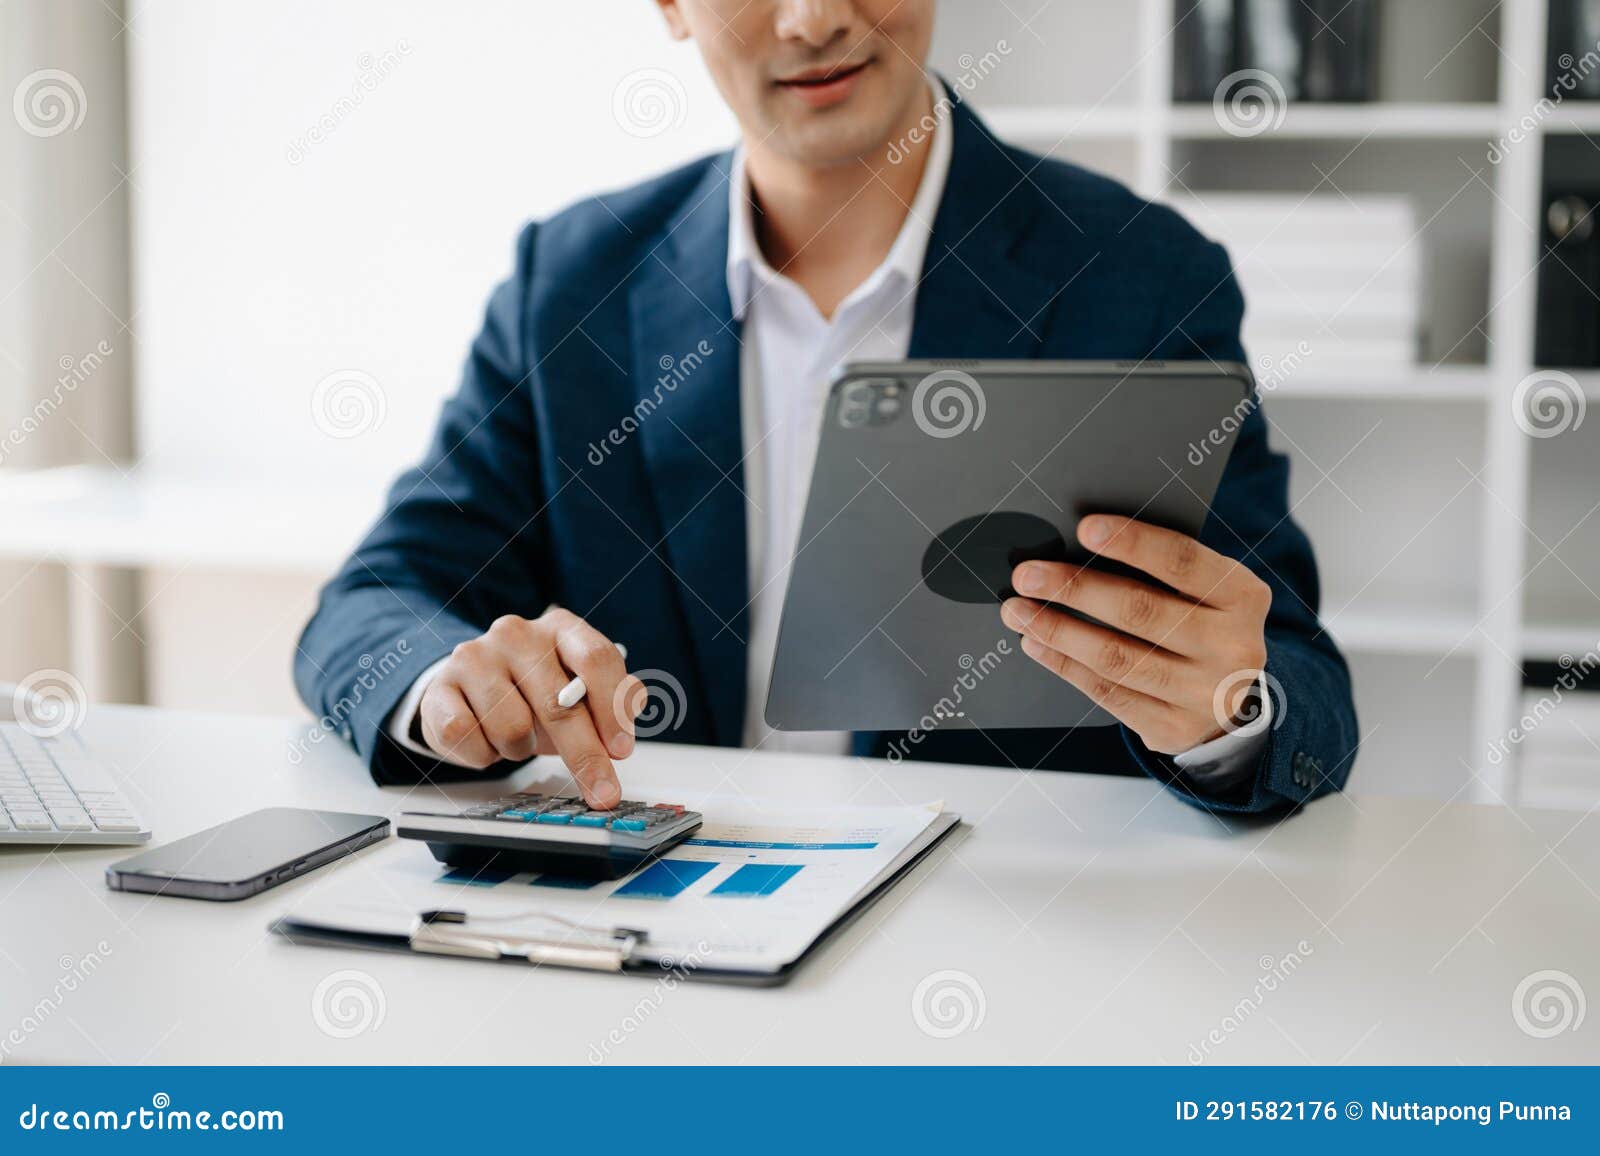 business man hands is typing on a laptop and holding smartphone at office